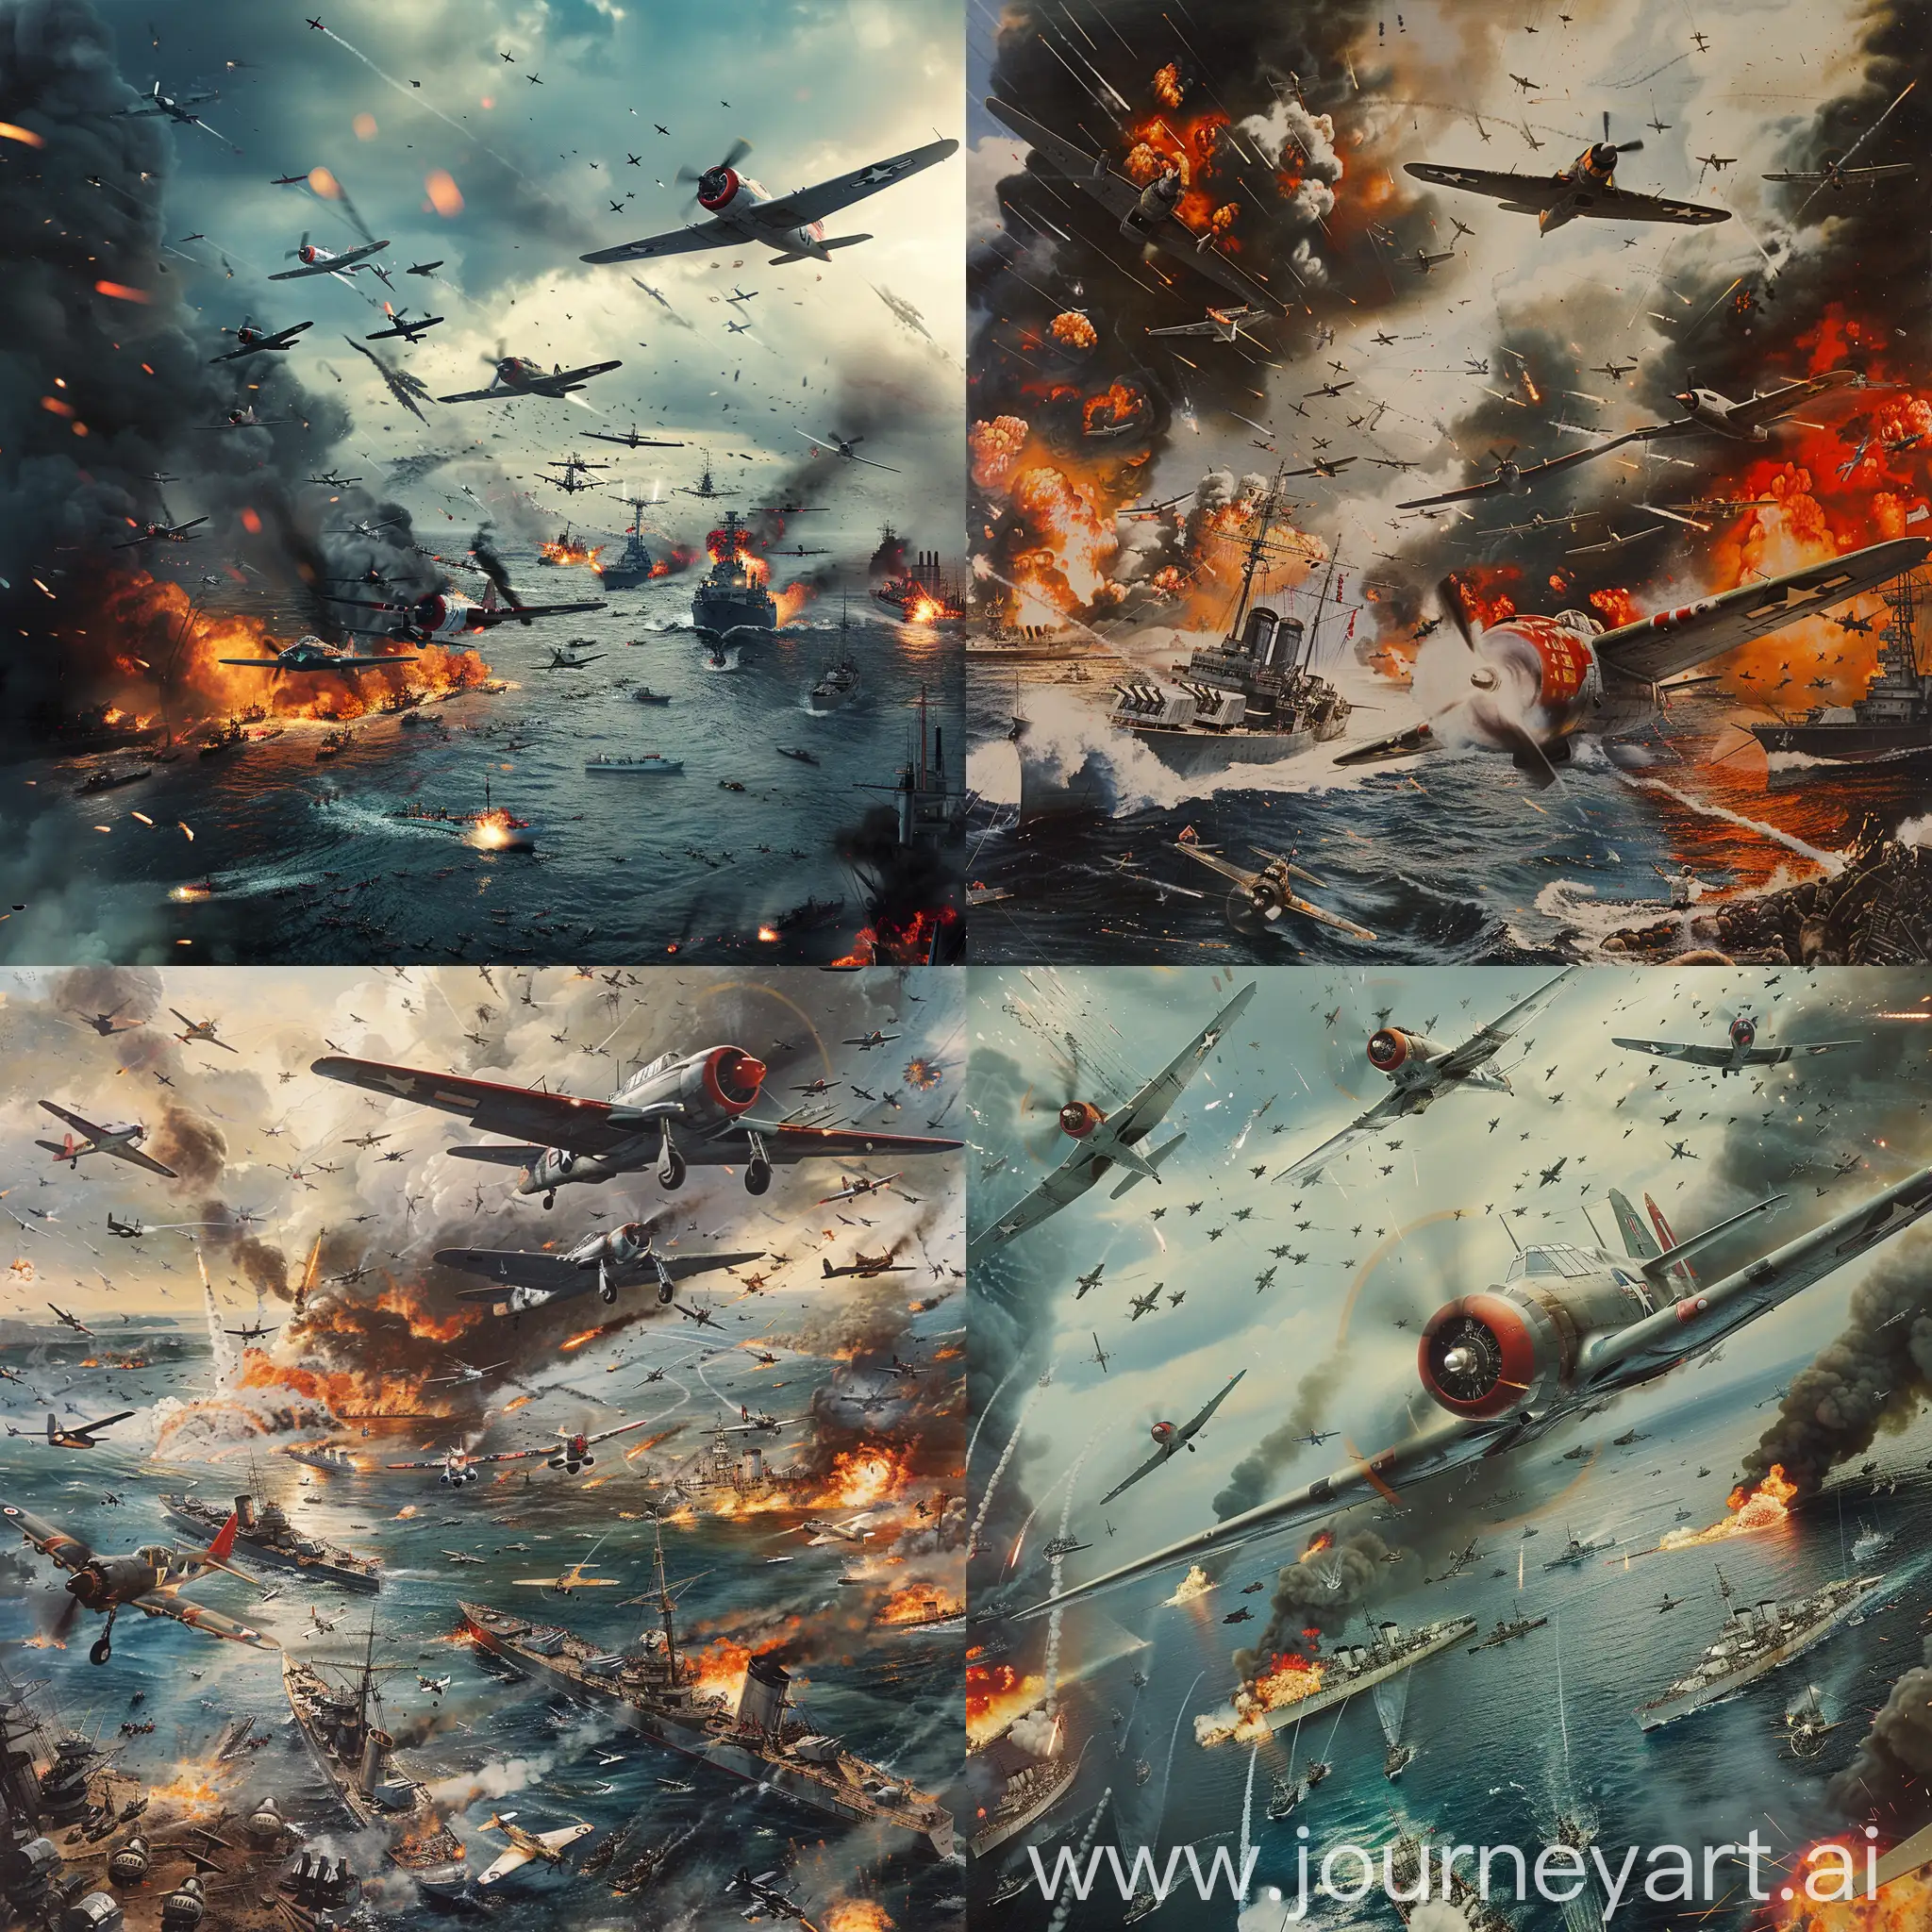 Battle of pearl harbor from many different angles, many fighter planes in the air, collision, explosion, fire, chaos, ocean, burning and sinking ships.